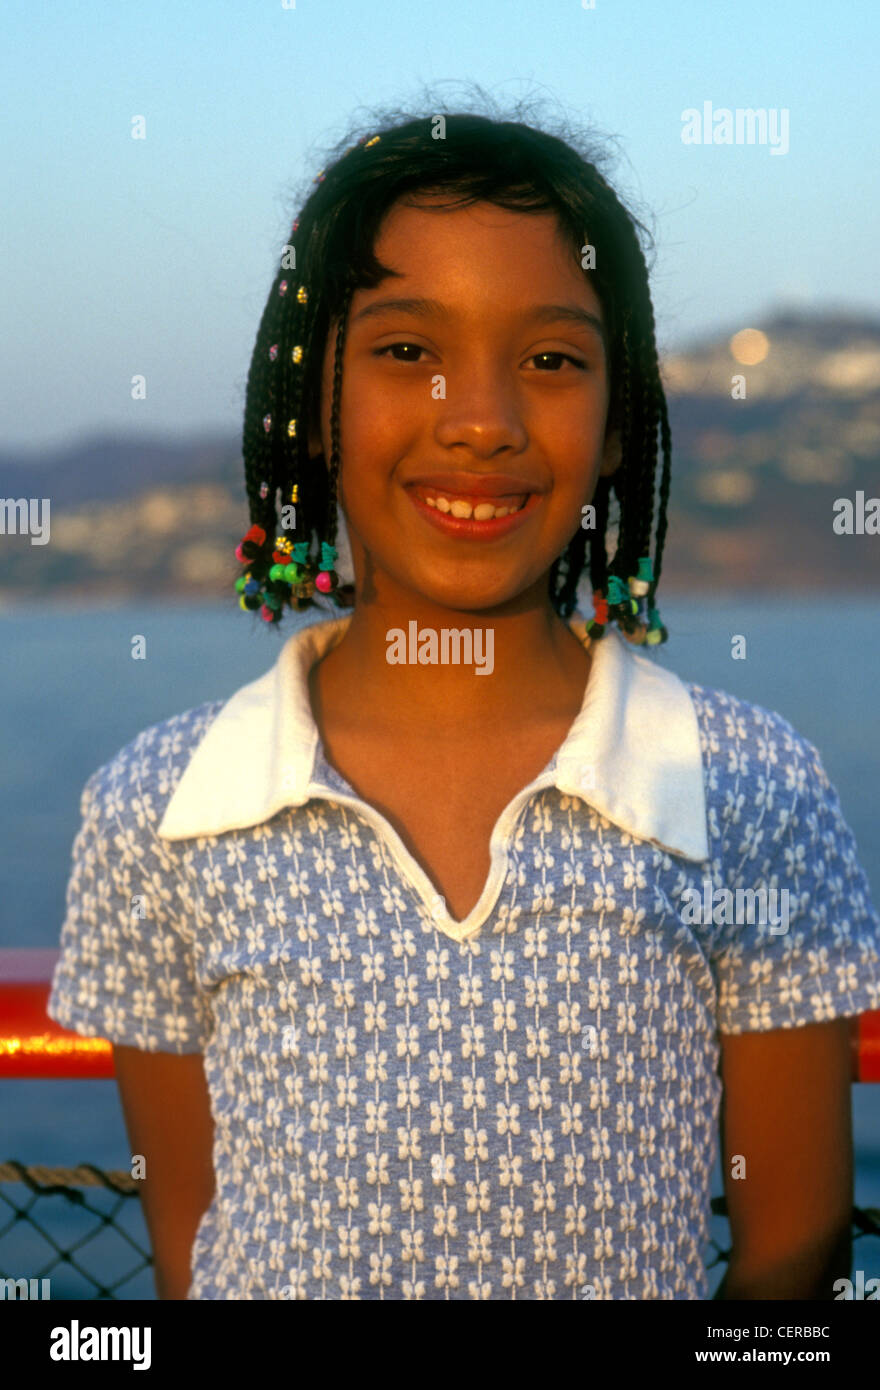 1, one, girl, young girl, boat cruise, eye contact, front view, head and shoulders portrait, Acapulco Bay, Acapulco, Guerrero State, Mexico Stock Photo